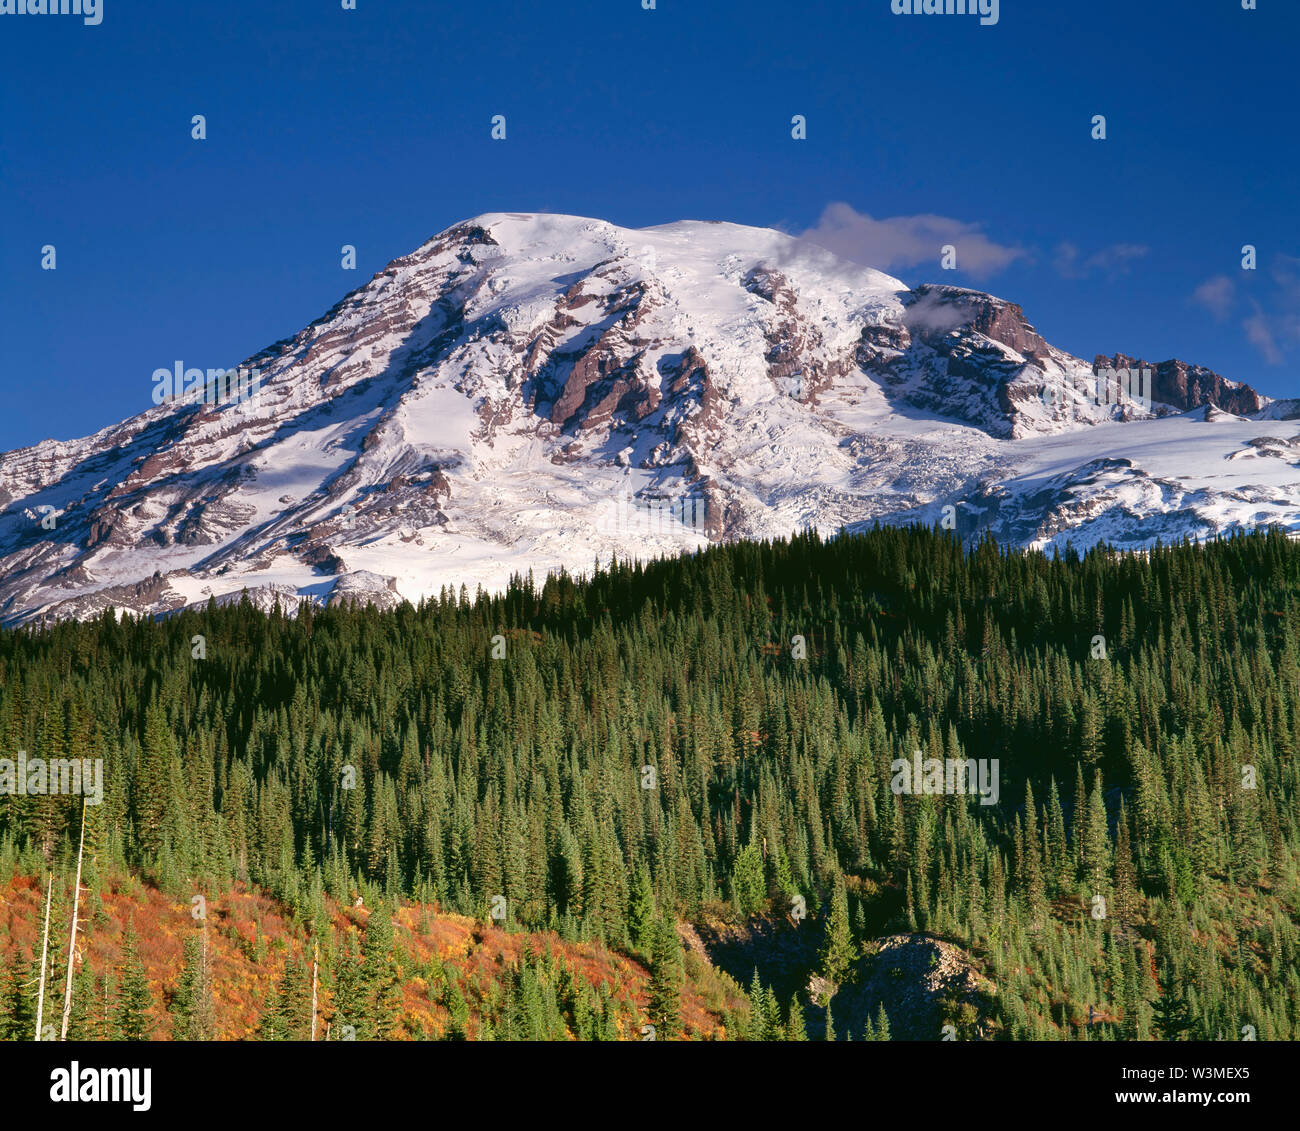 USA, Washington, Mt. Rainier National Park, South side of Mt. Rainier rises above evergreen forest and fall colored shrubs. Stock Photo